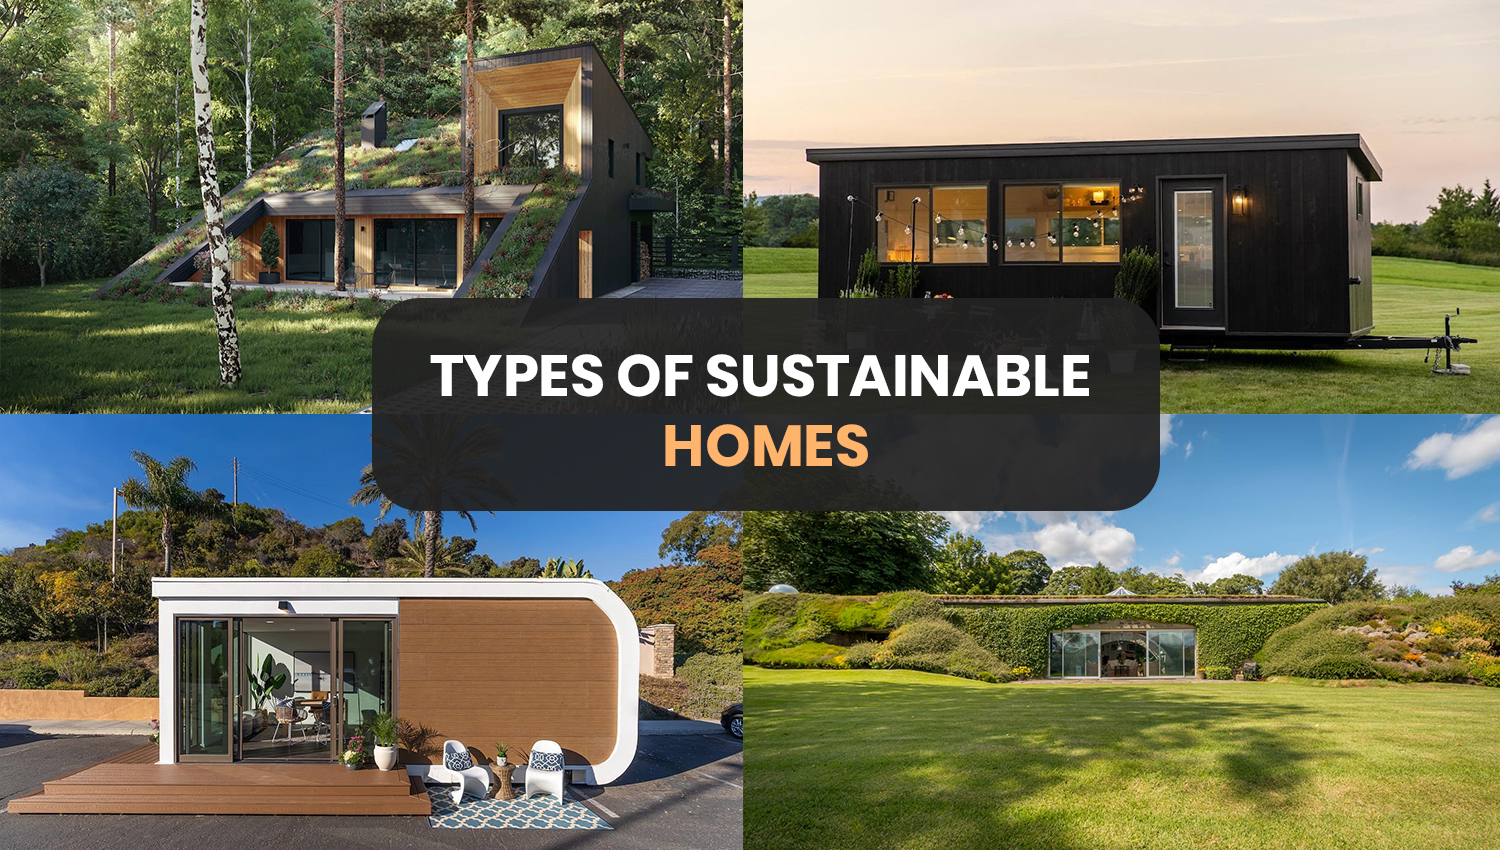 Types of Sustainable Homes